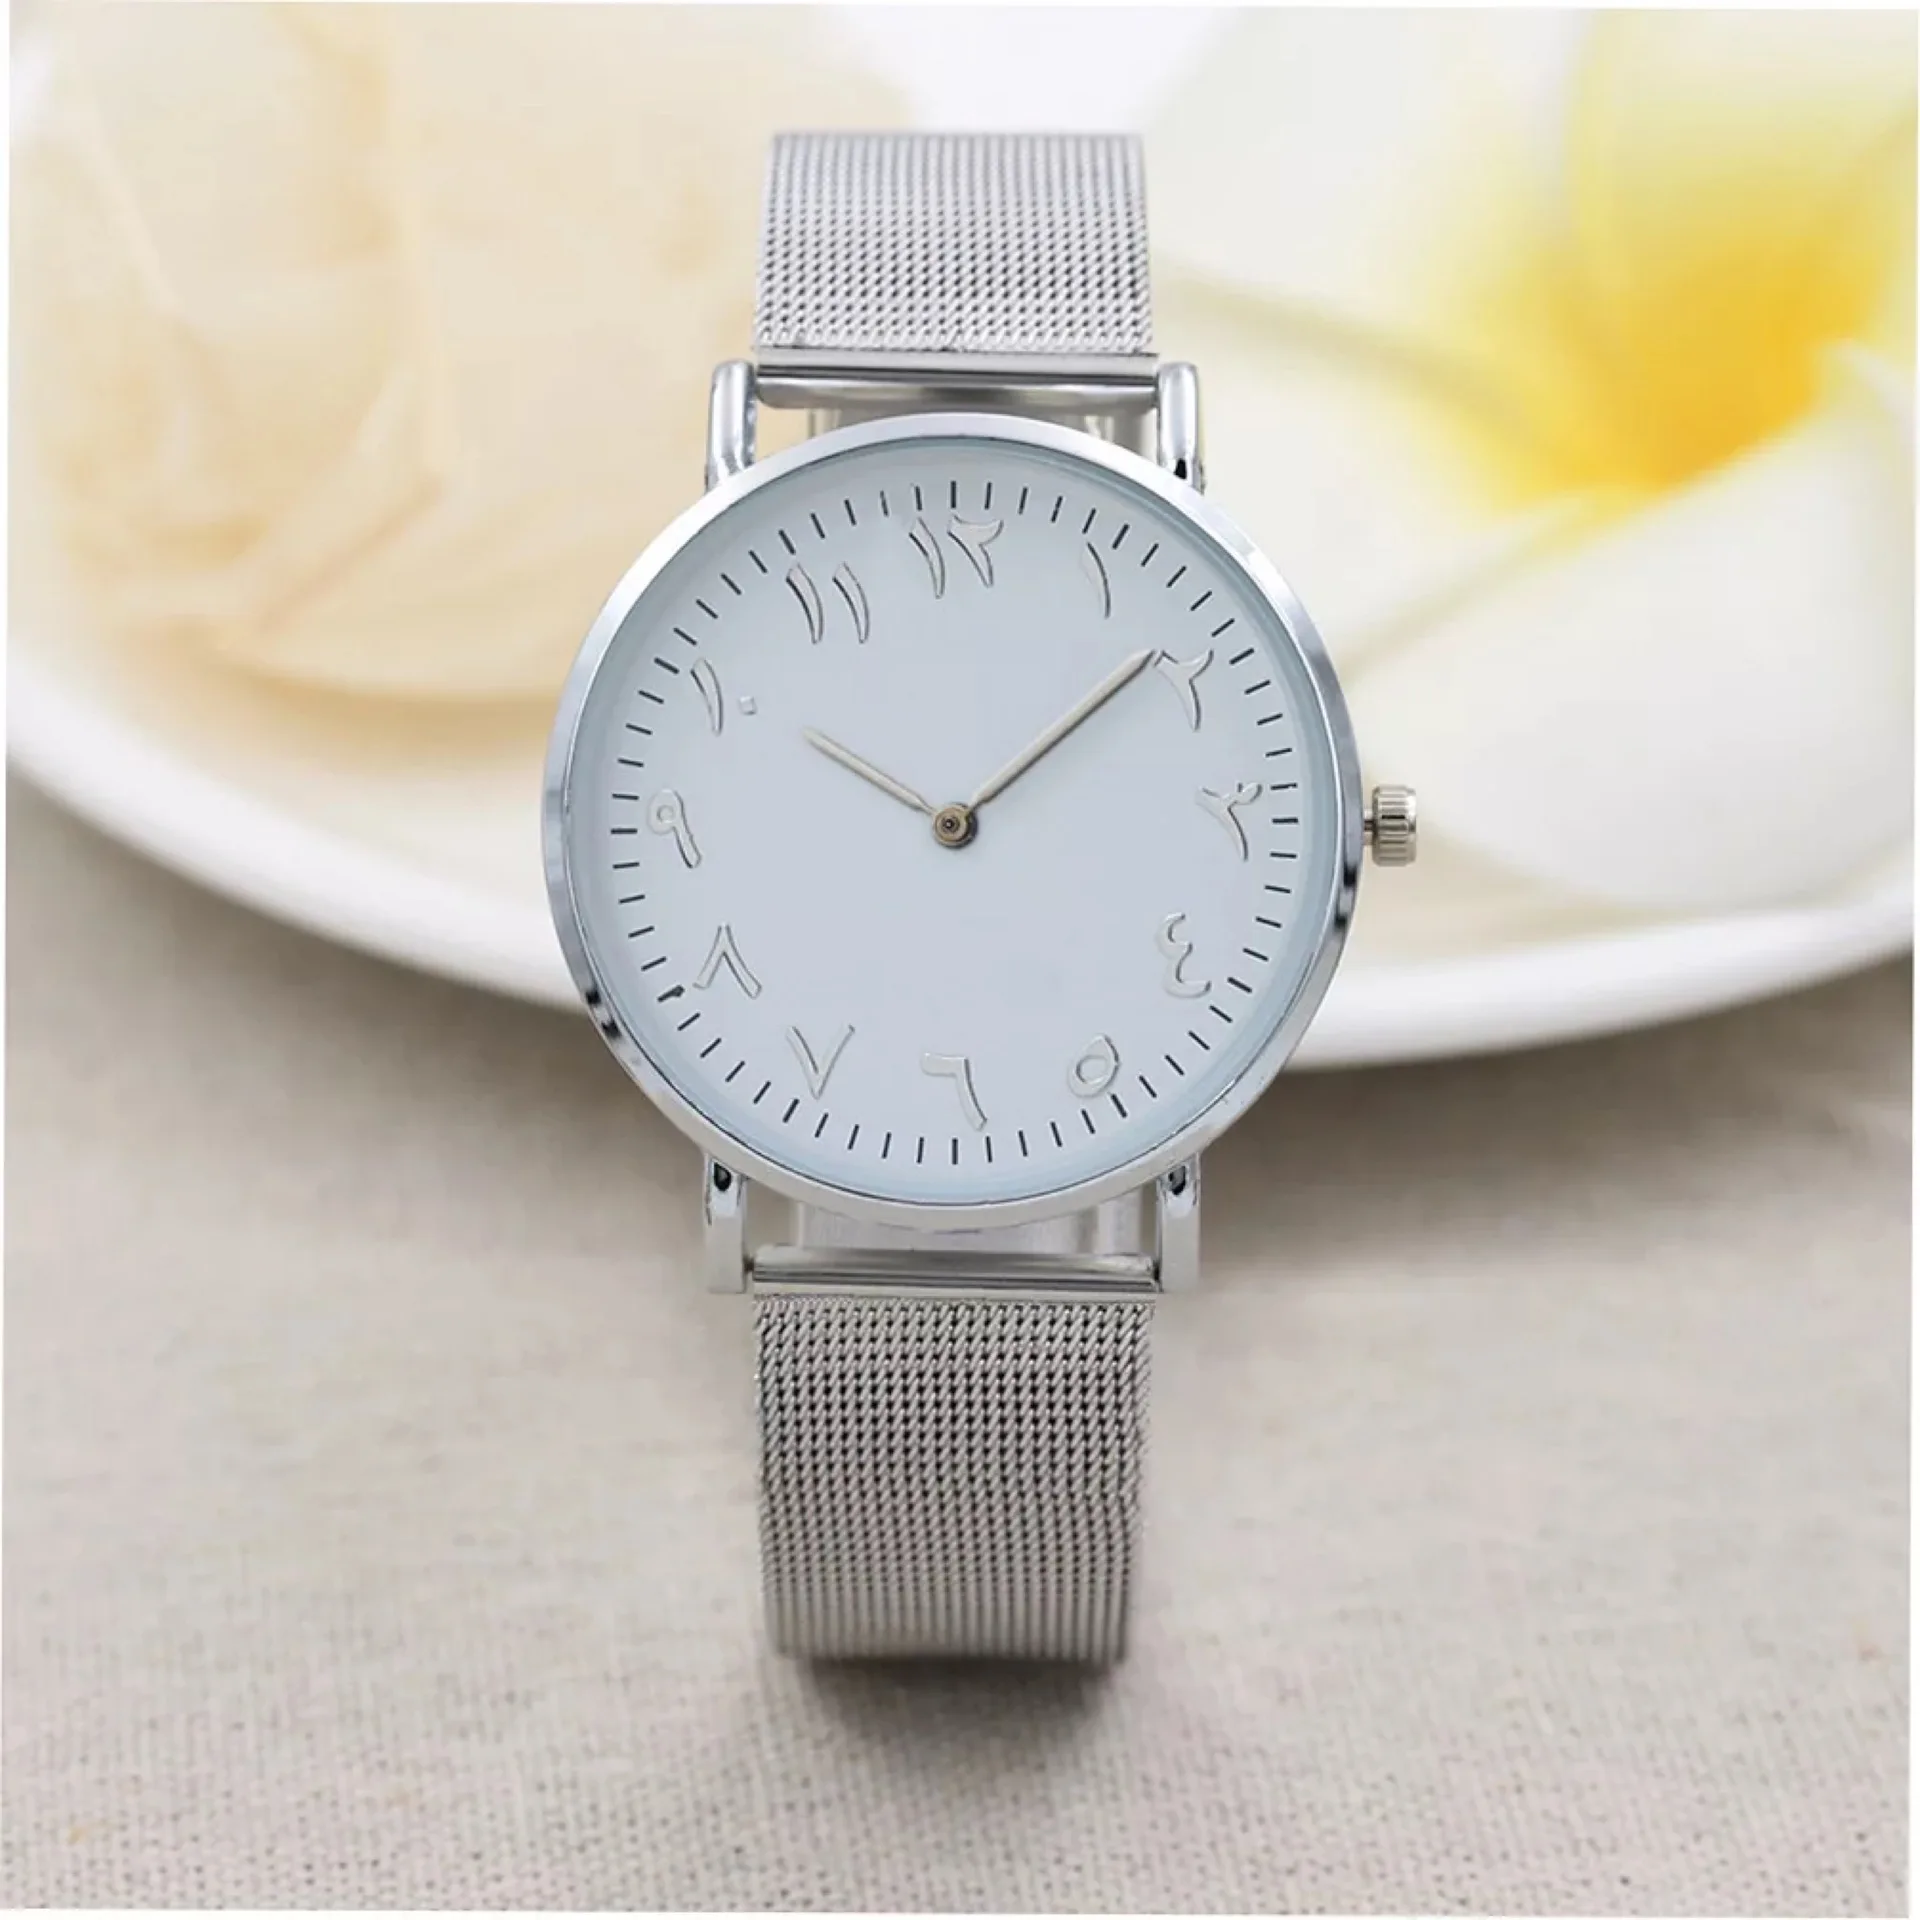 

Arabic Numbers Watch Unique Big Case Automatic Self Wind Stainless Steel Quartz Clock Wriswatches Fashion Women Relogio